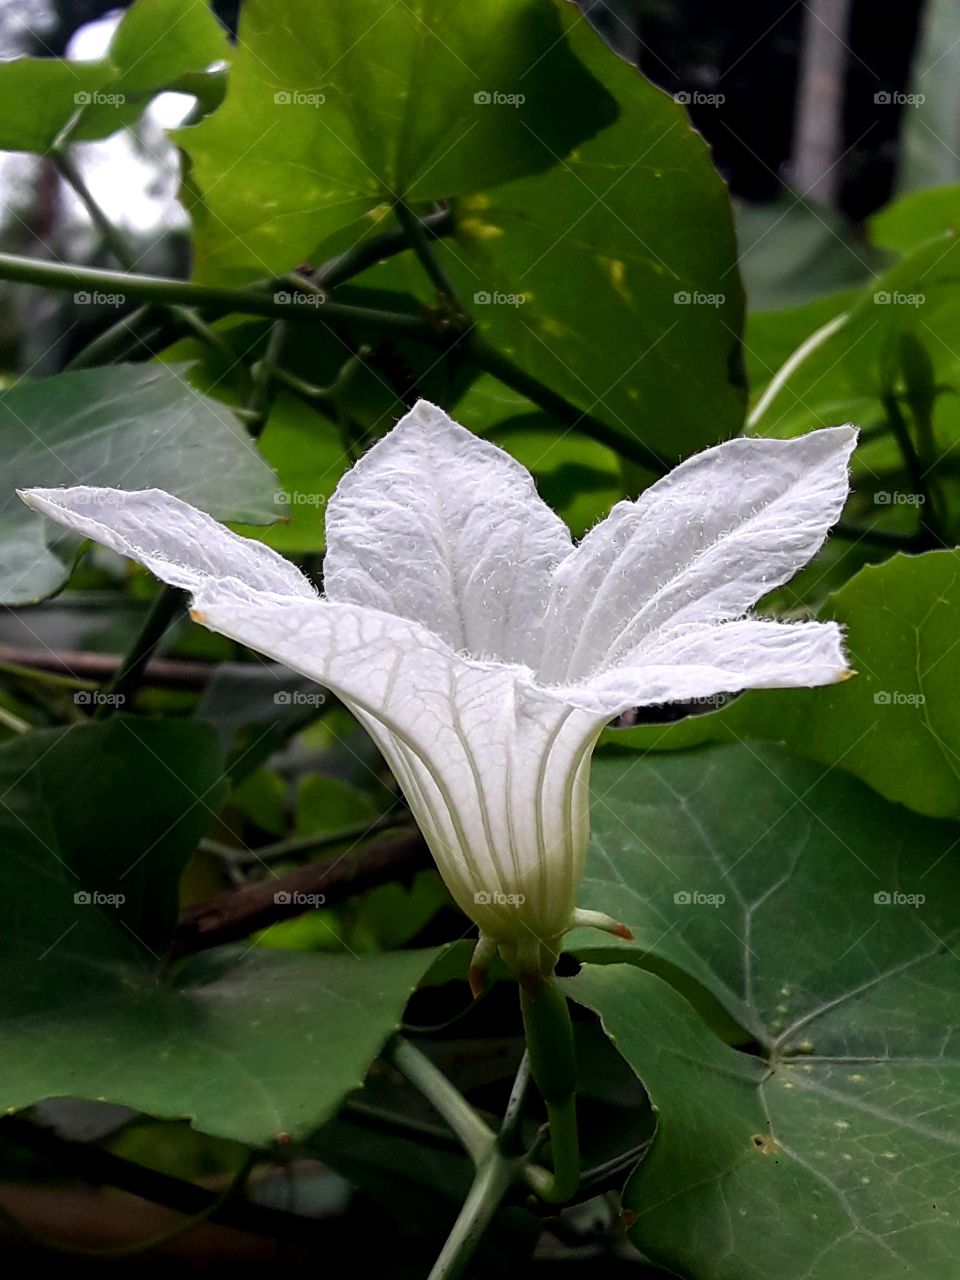 White color blooming flower